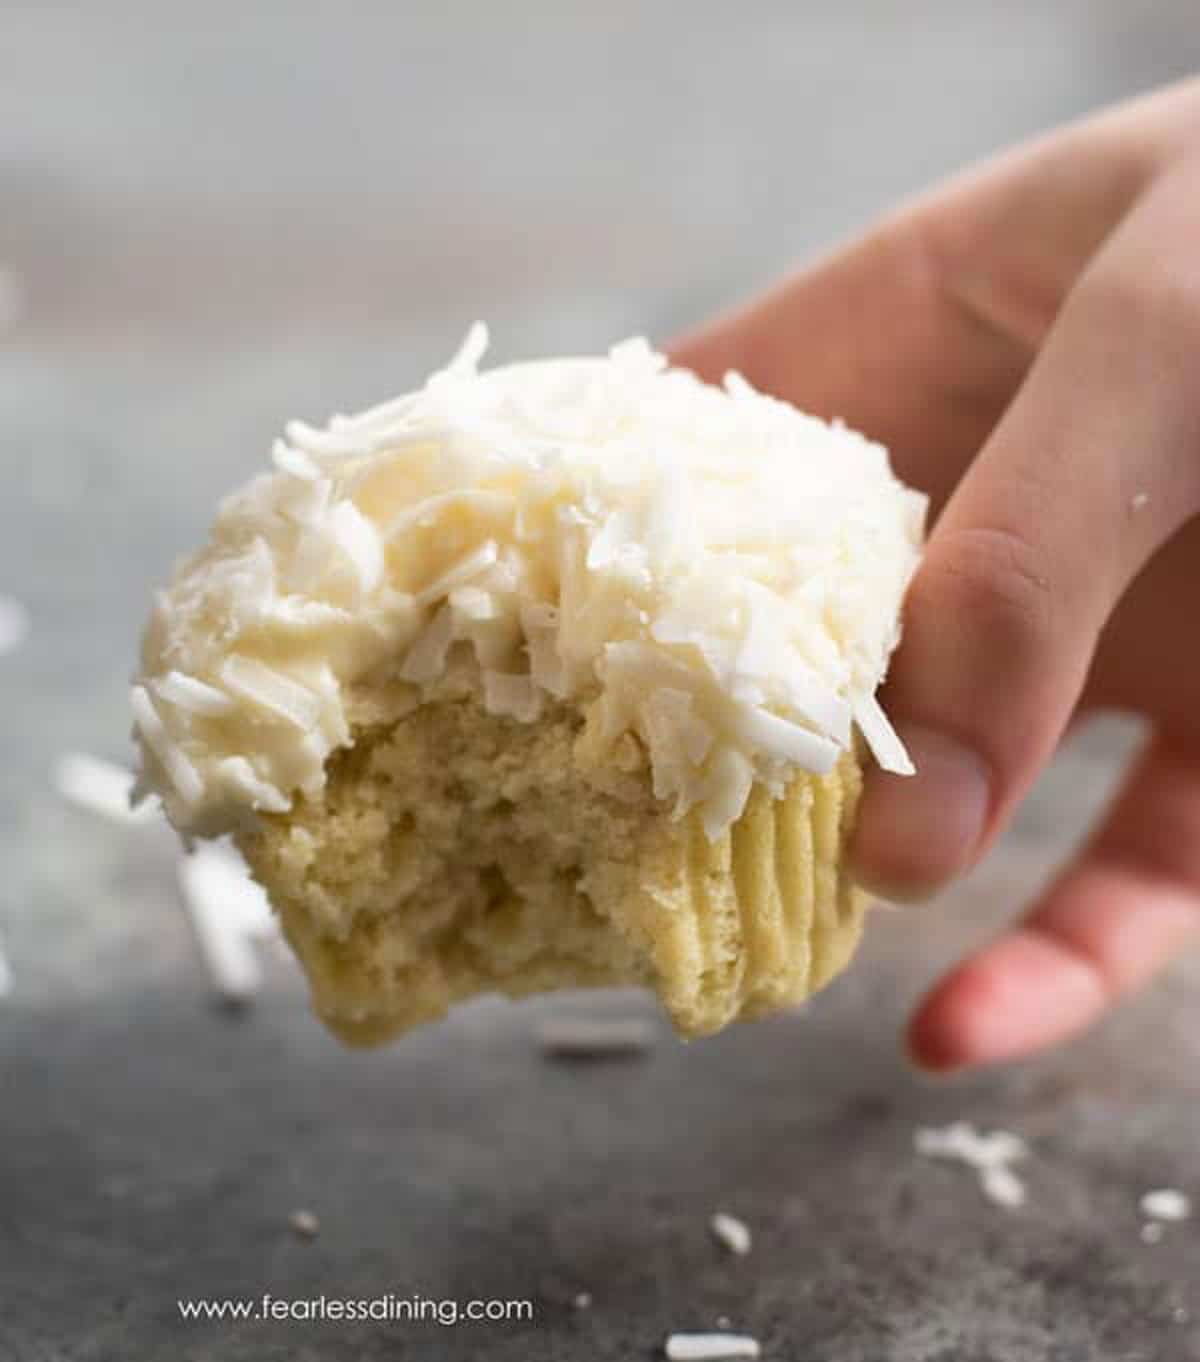 A hand holding a cupcake with a bite taken out.